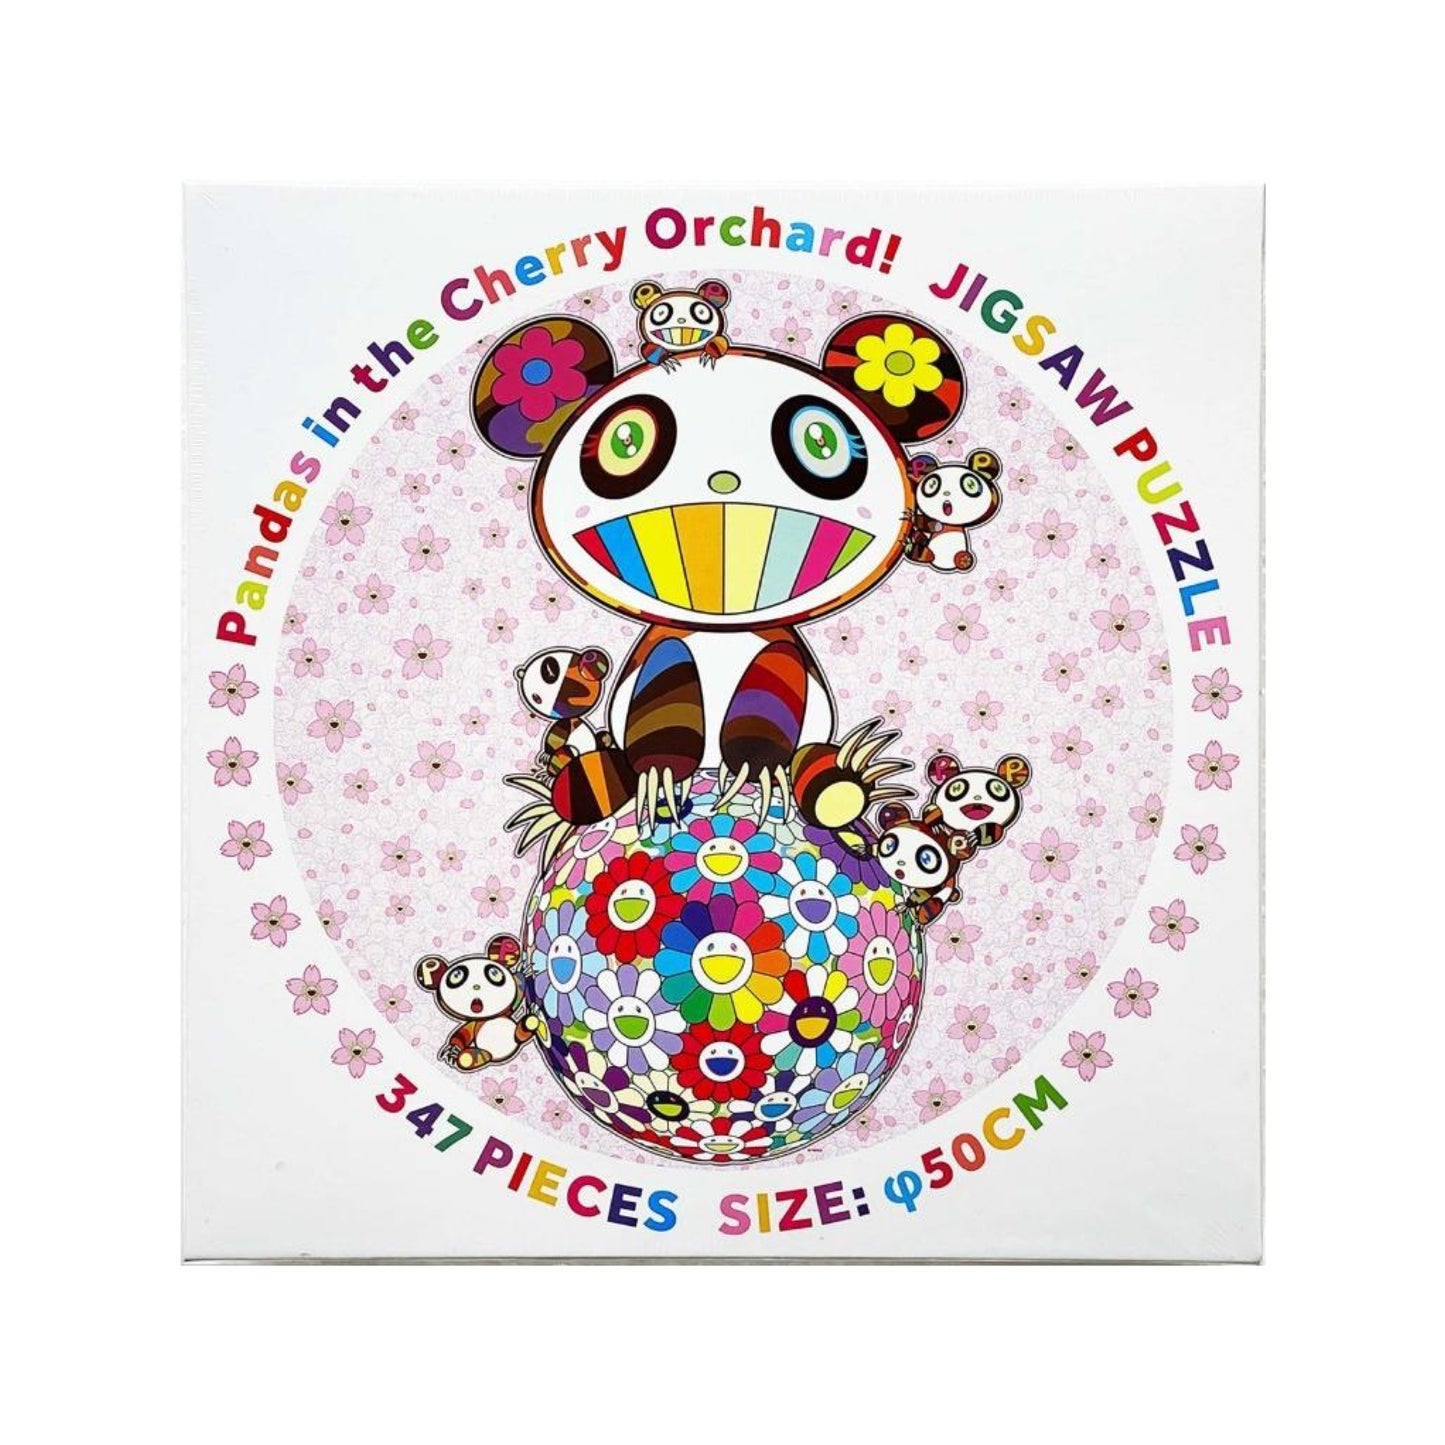 TAKASHI MURAKAMI - Pandas in the Cherry Orchard 347 Pieces Jigsaw Puzzle, 2021